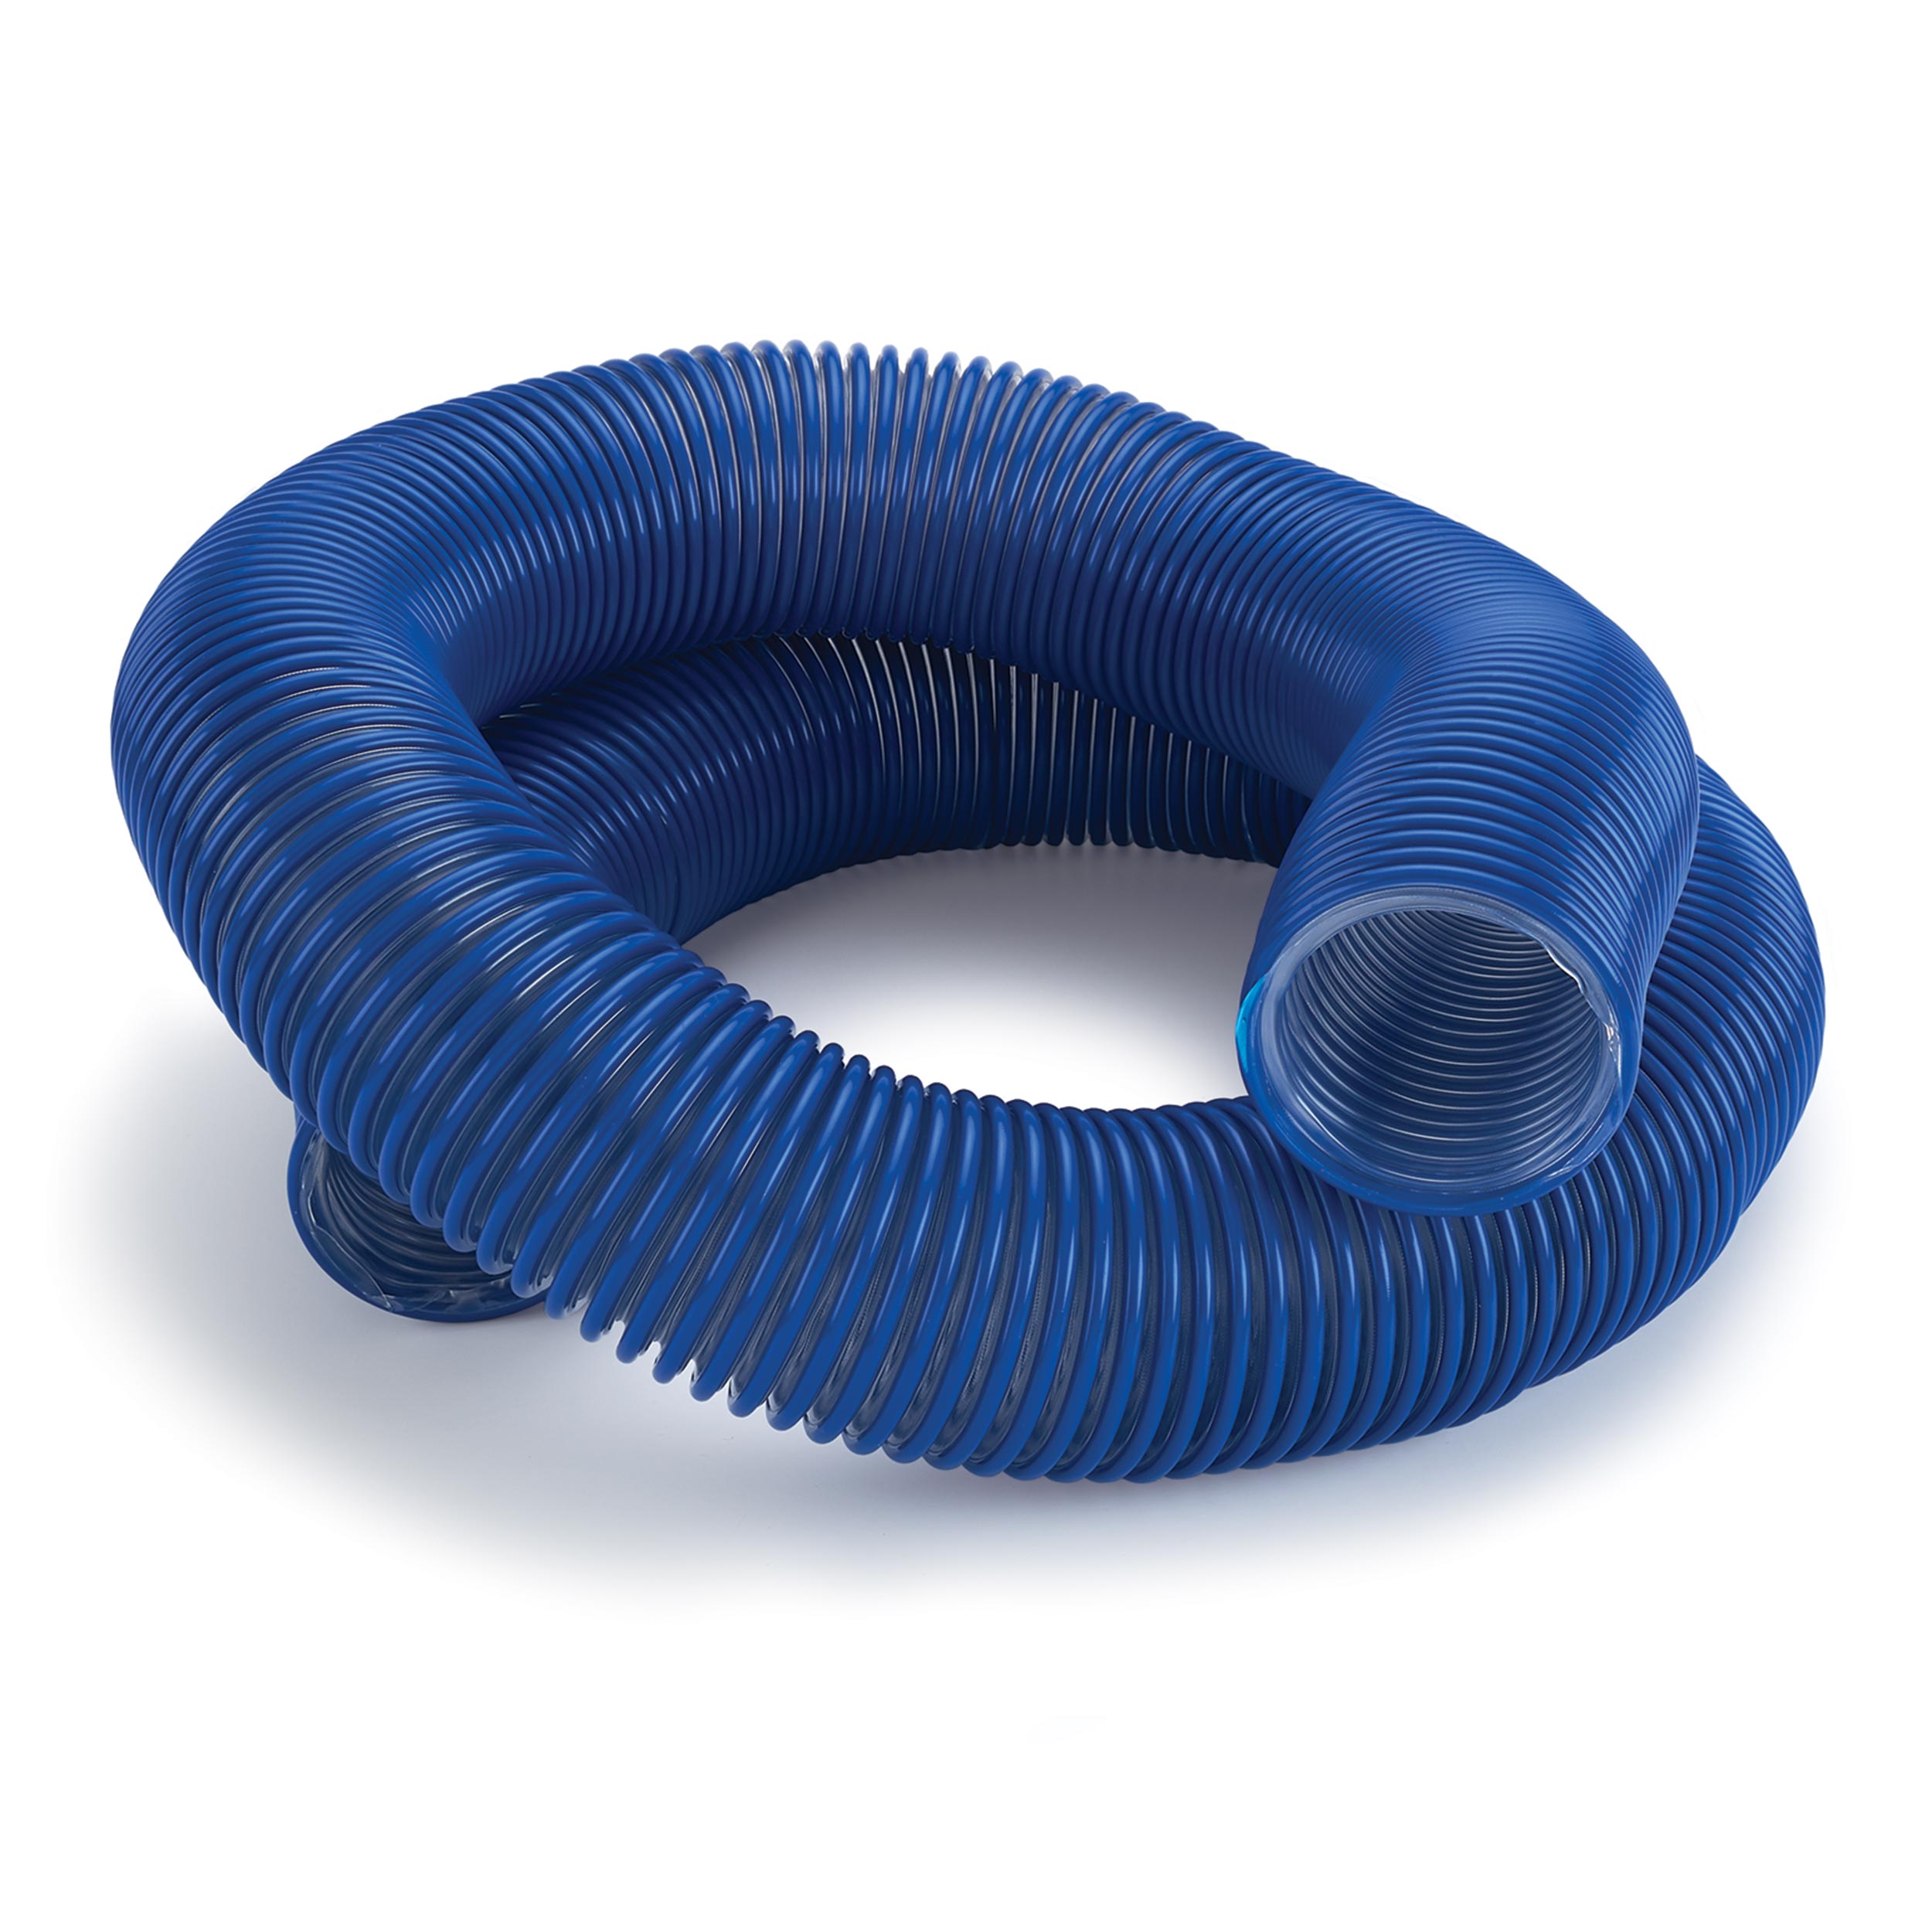 Flexaust 2-1/2" Anti-static Clear Dust Collection Hose